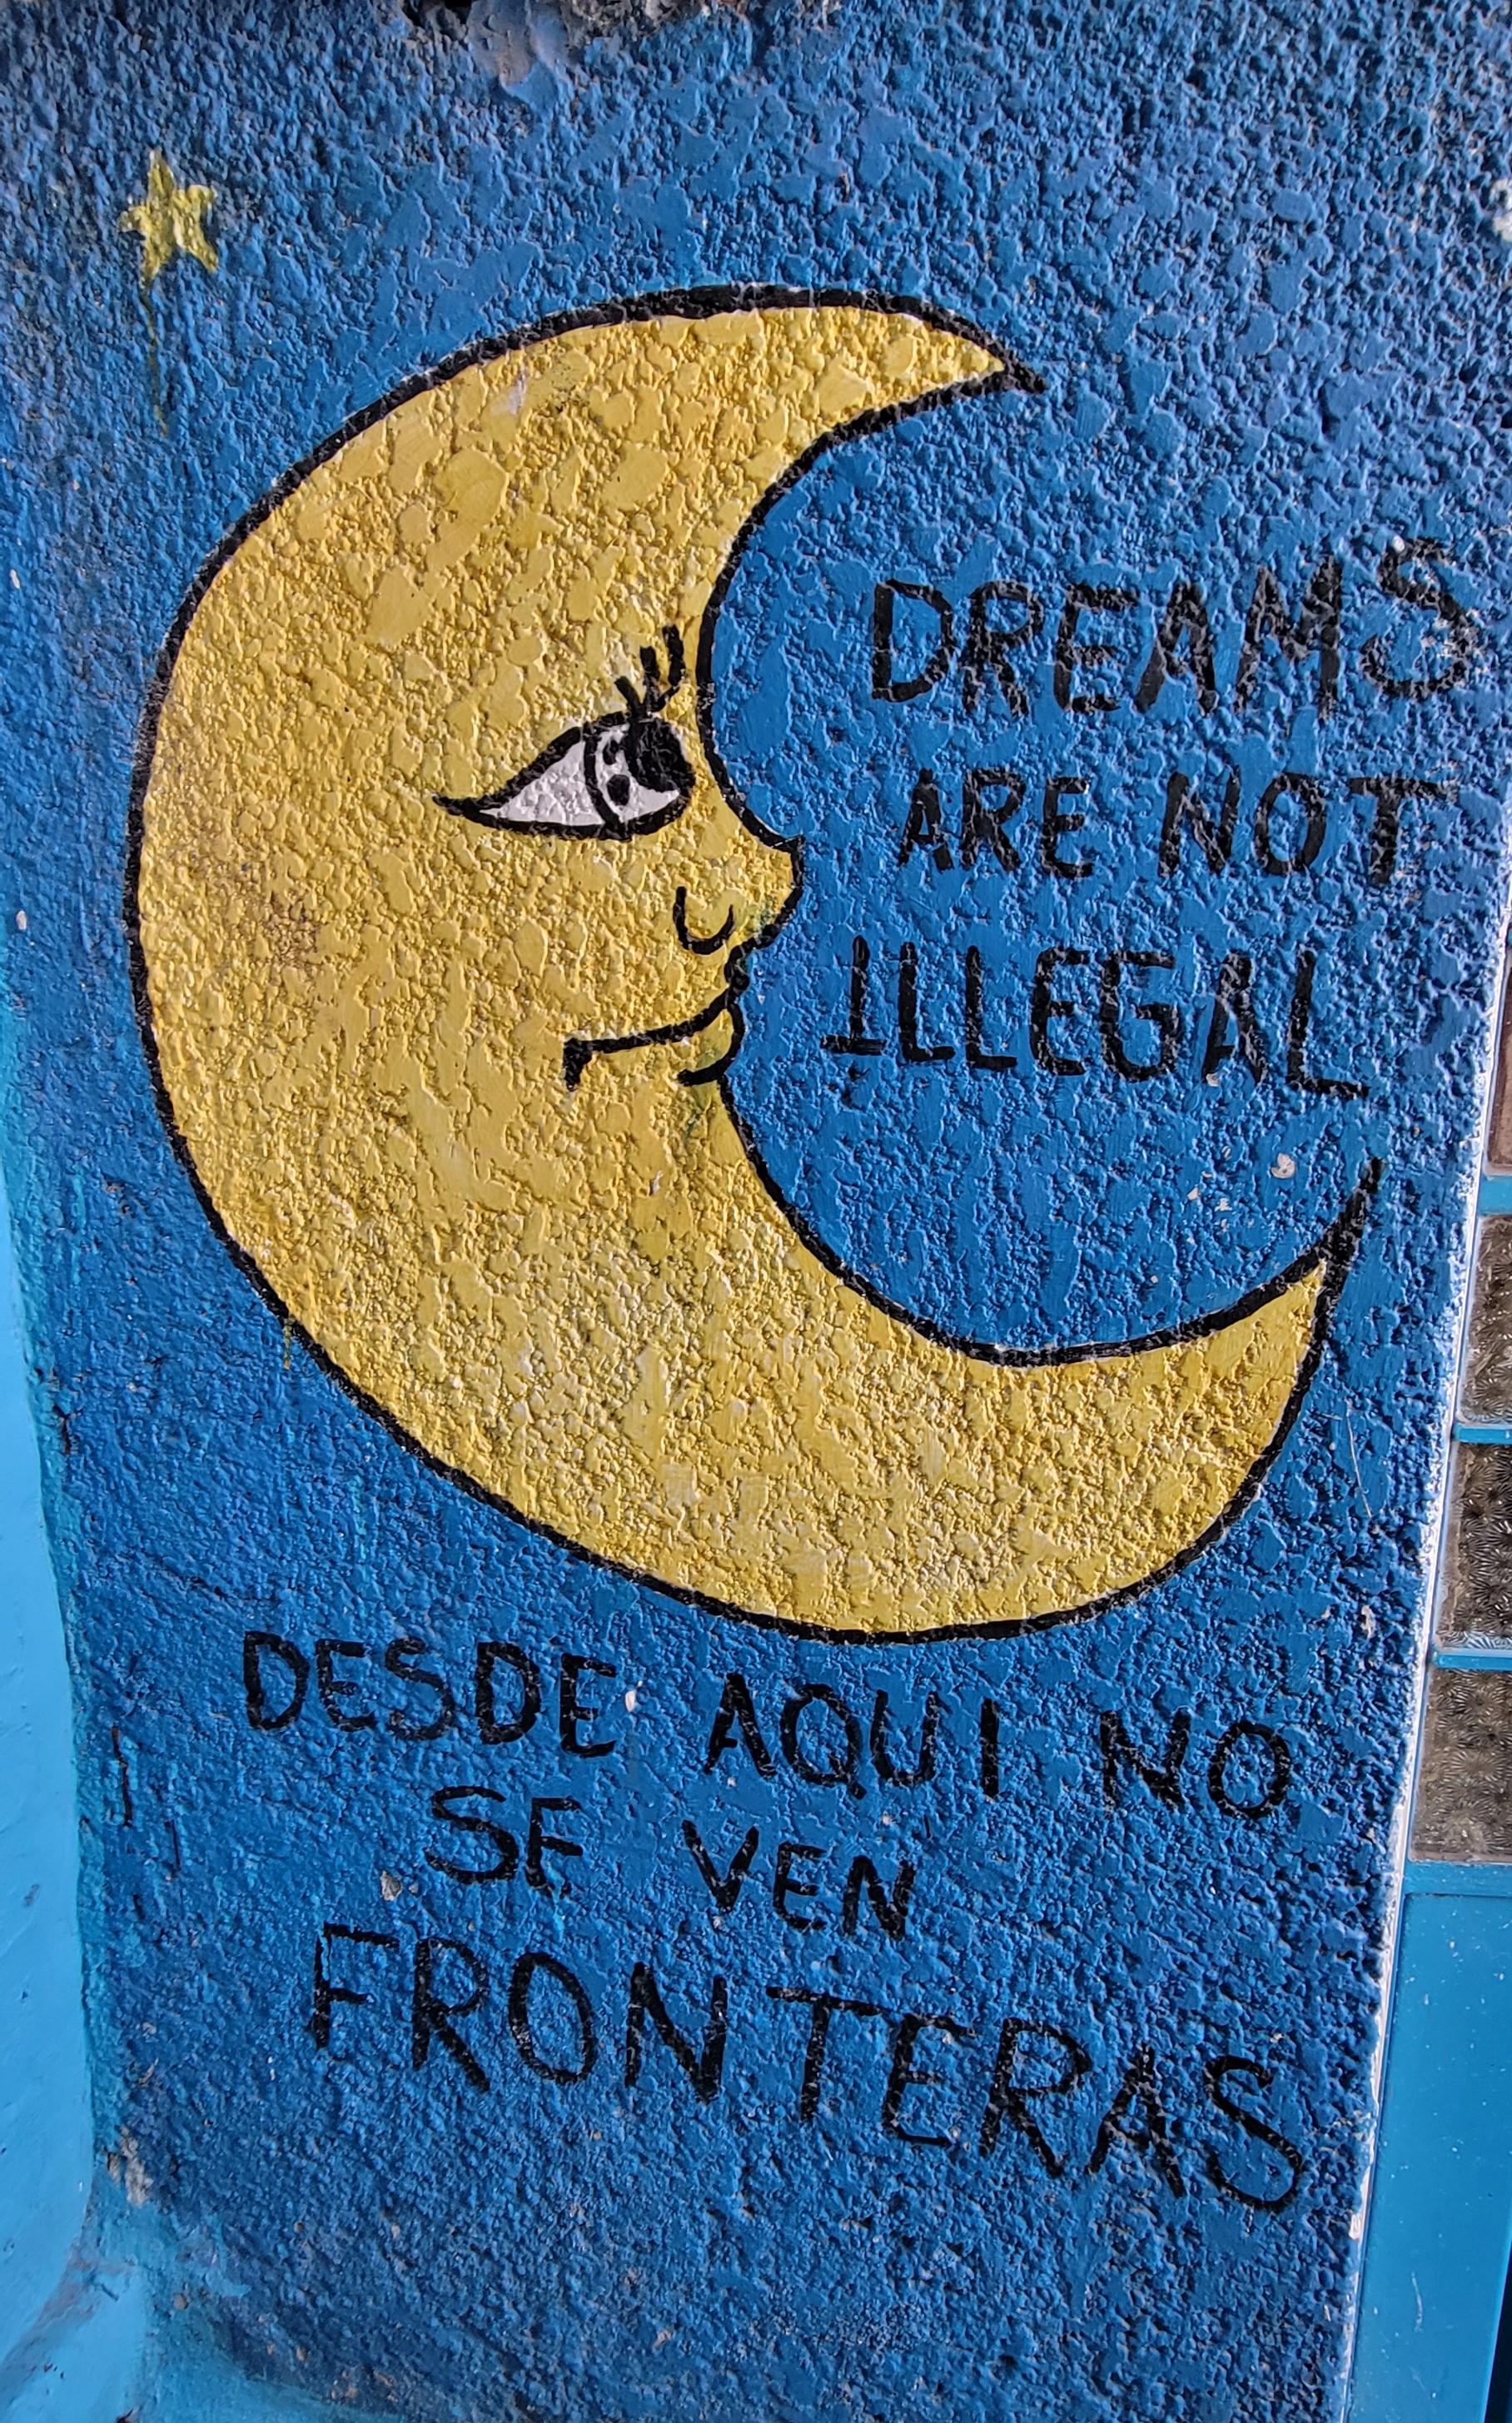 “Dreams are not illegal. We see no borders from here,” reads another mural painted by migrants Albergue Tochán.